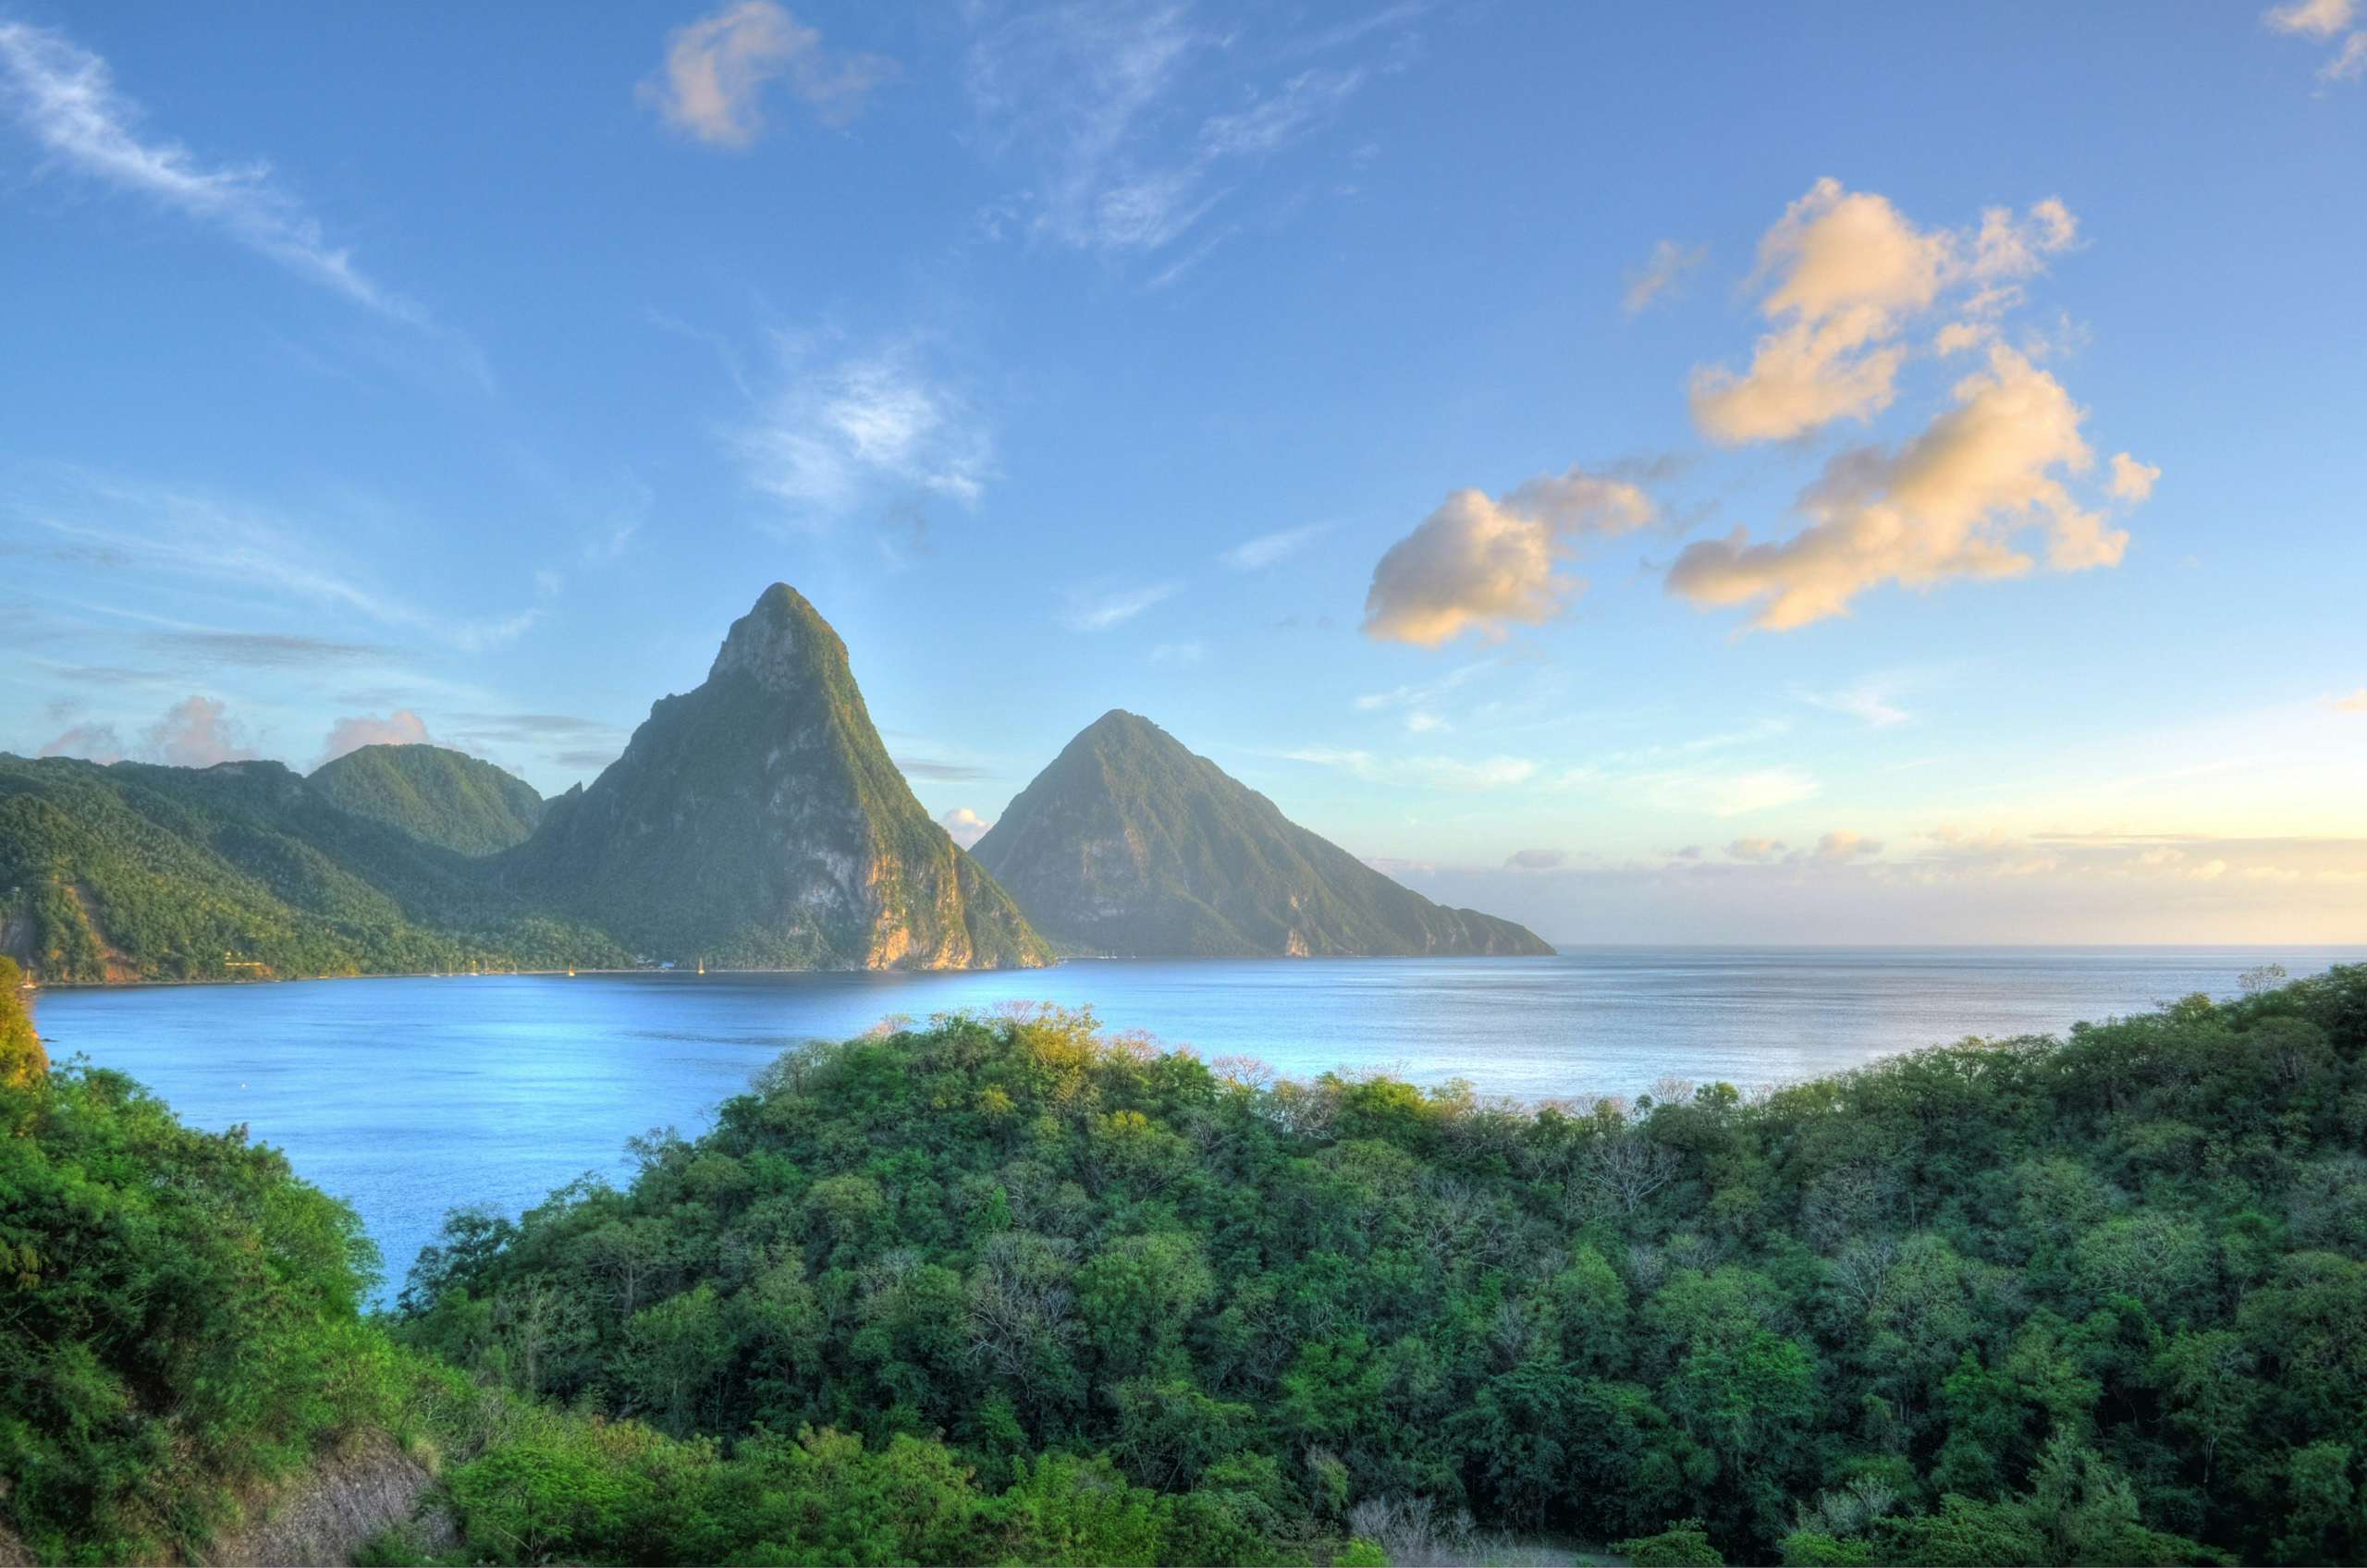 A serene daytime view of St. Lucia, featuring white sand beaches, untouched green nature, and foggy, high, pointed mountains in the background—a captivating scene for your Caribbean St. Lucia Charter Yacht journey.